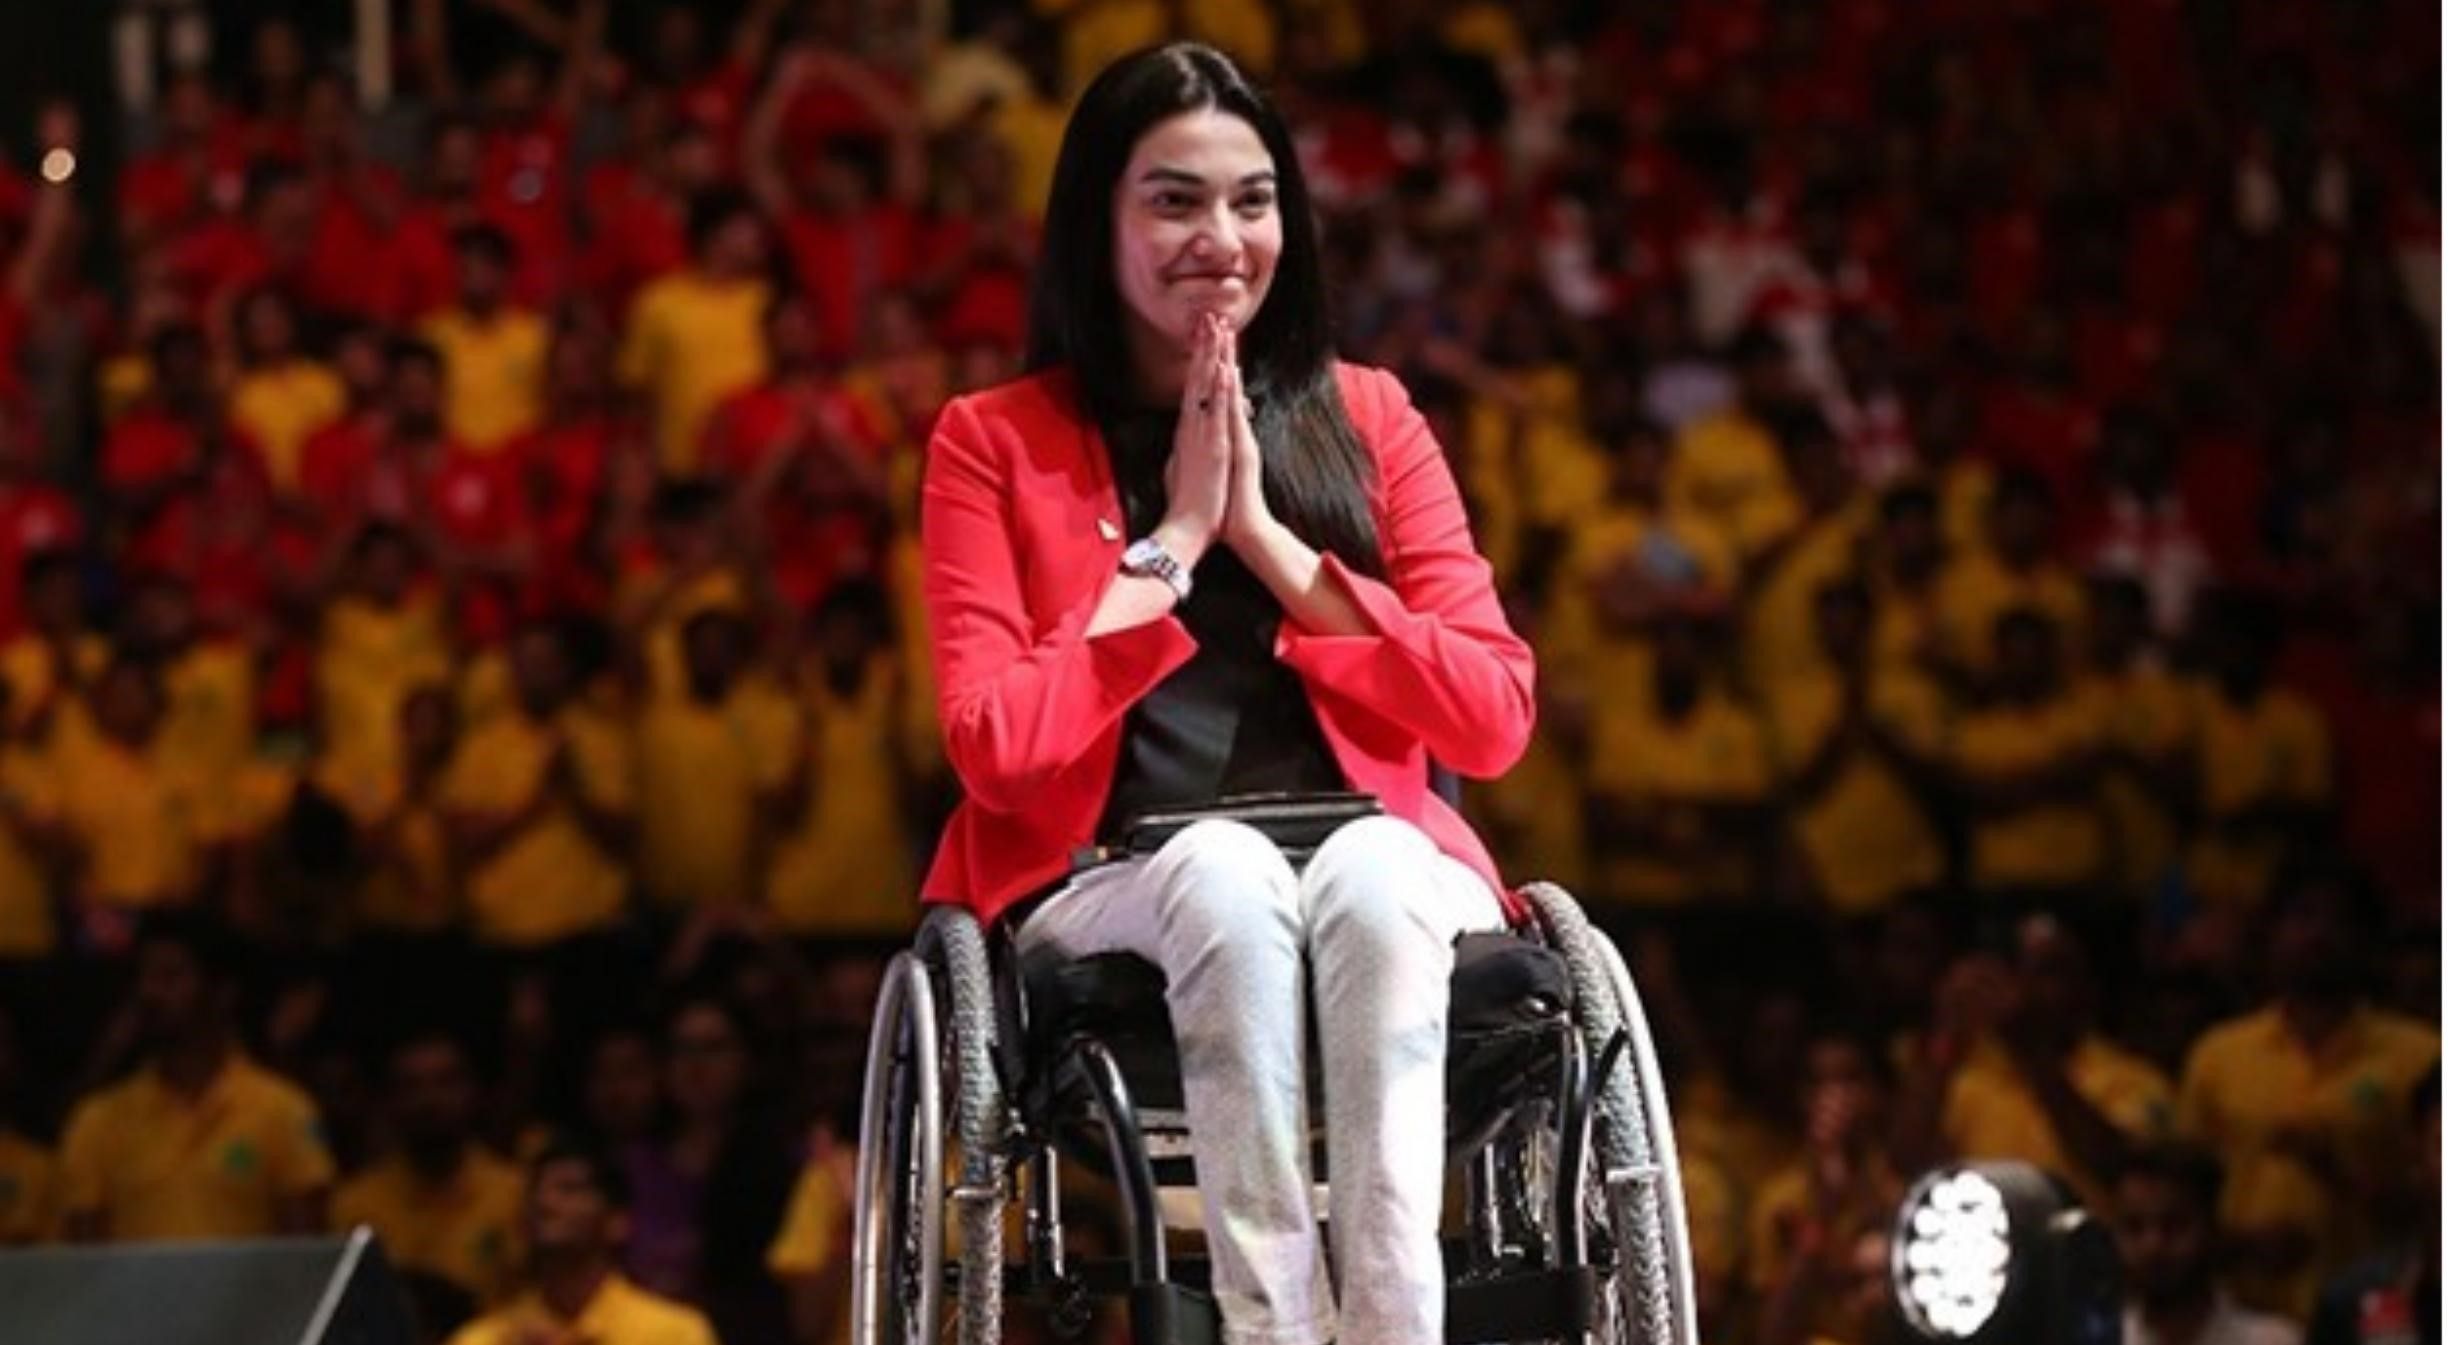 How Muniba Mazari Is Teaching That No Disability Can Keep You From